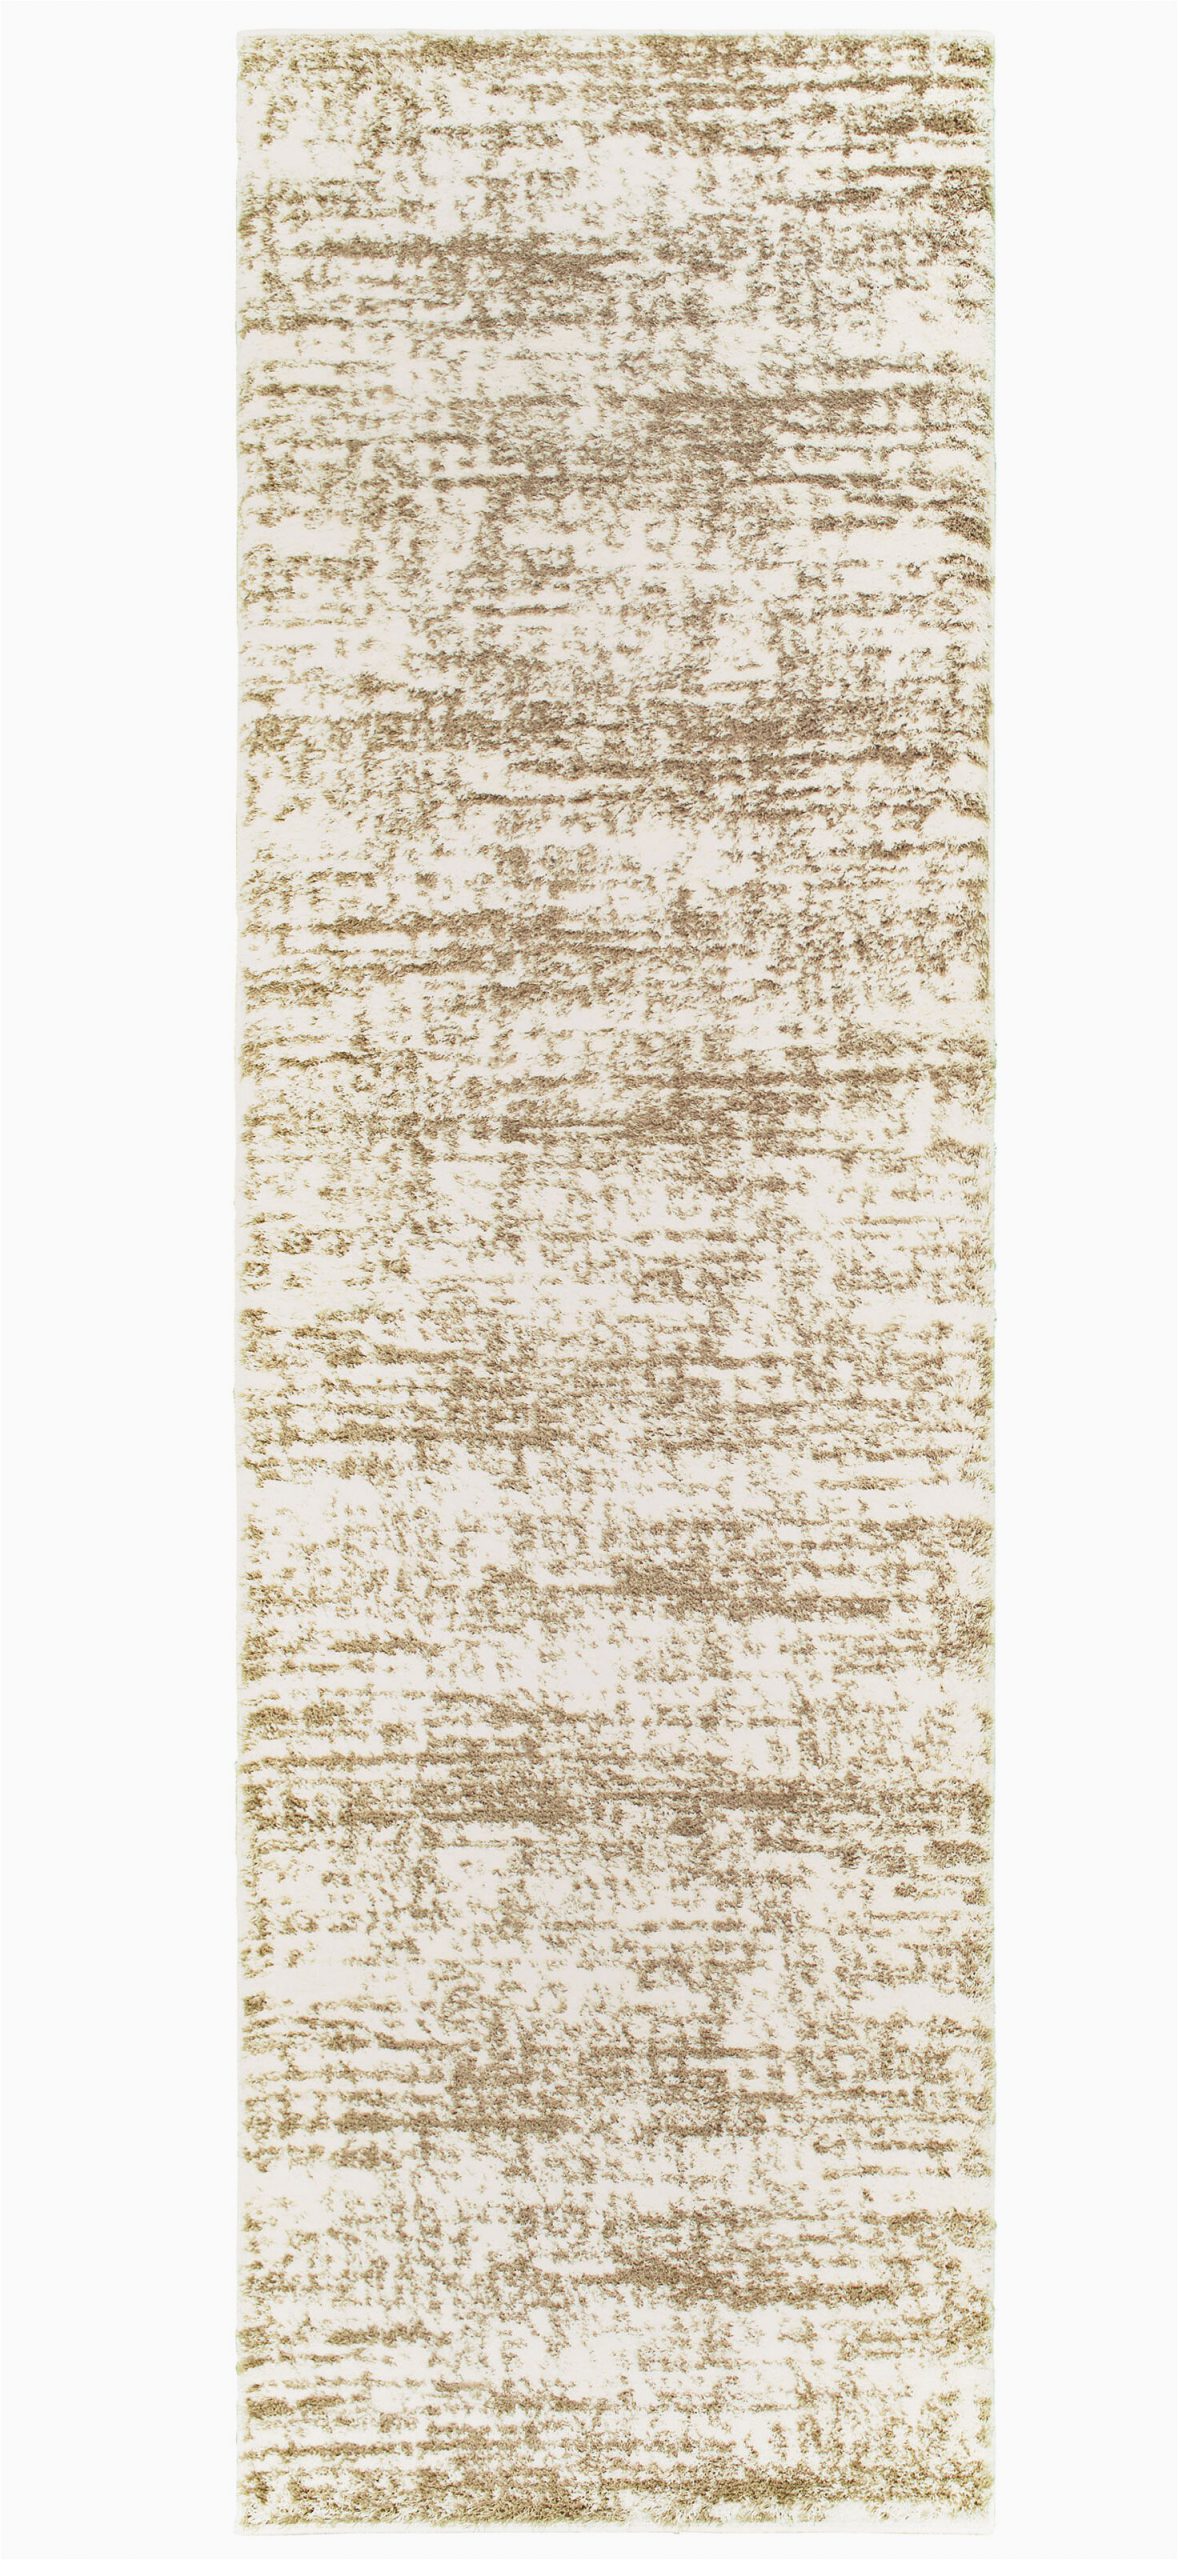 Ivory and Taupe area Rug Mccurdy Abstract Ivory Taupe area Rug